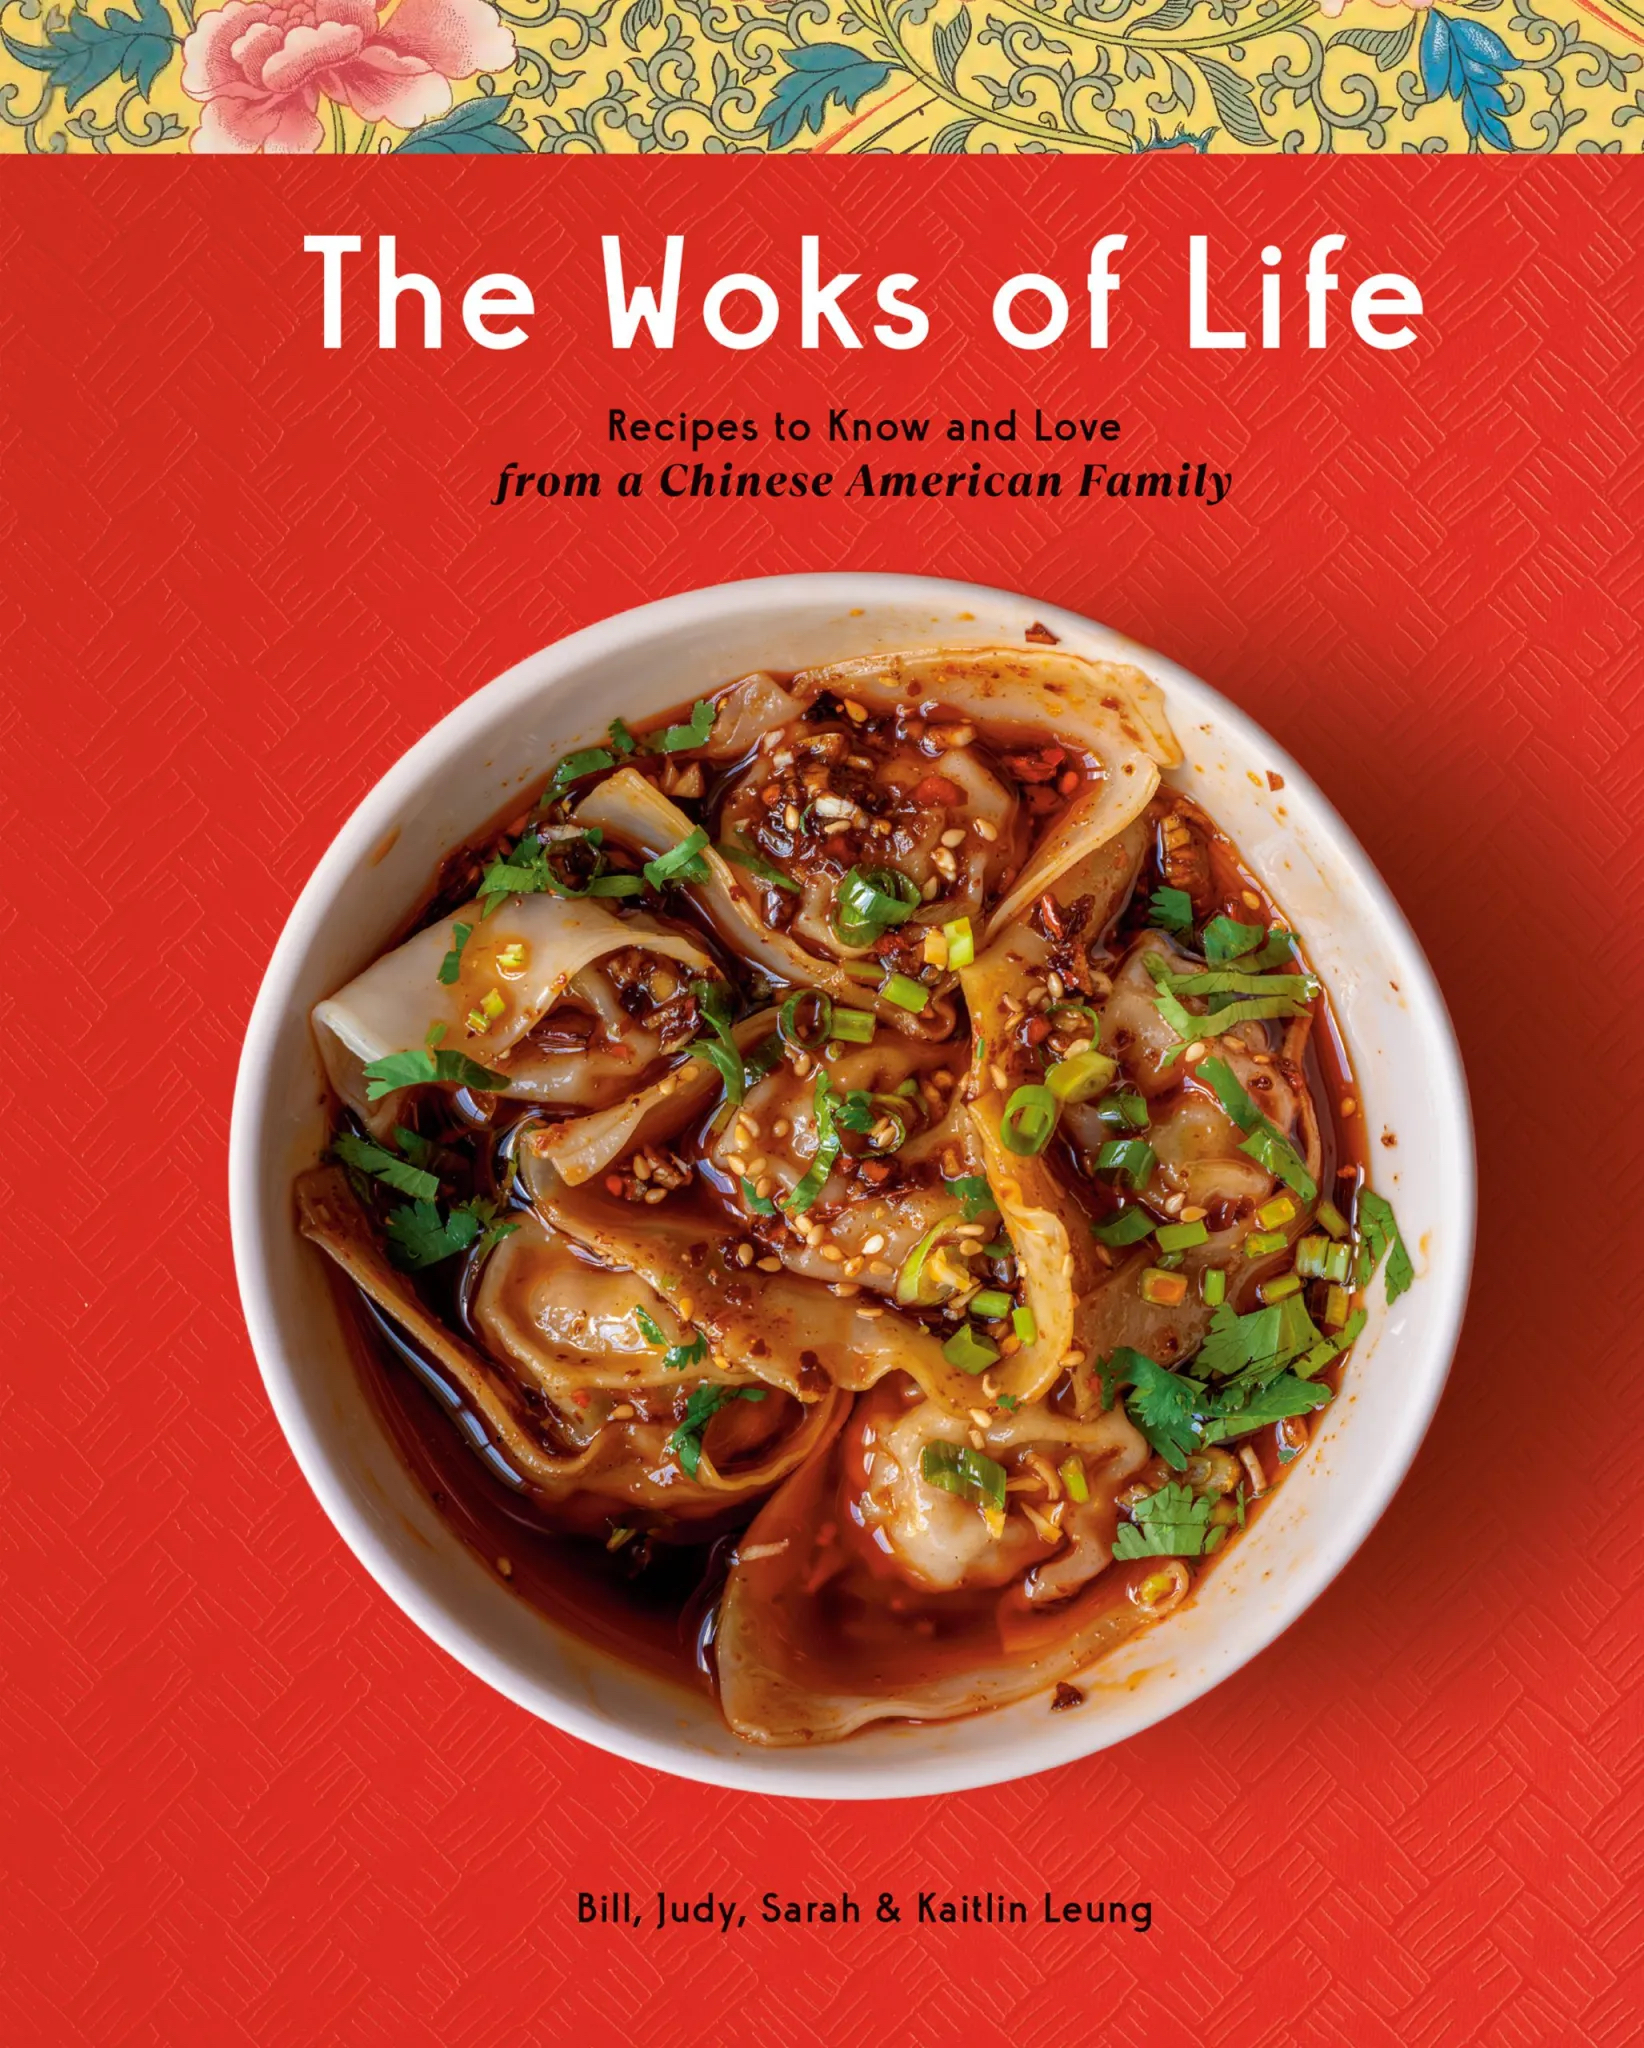 The Woks of Life book cover